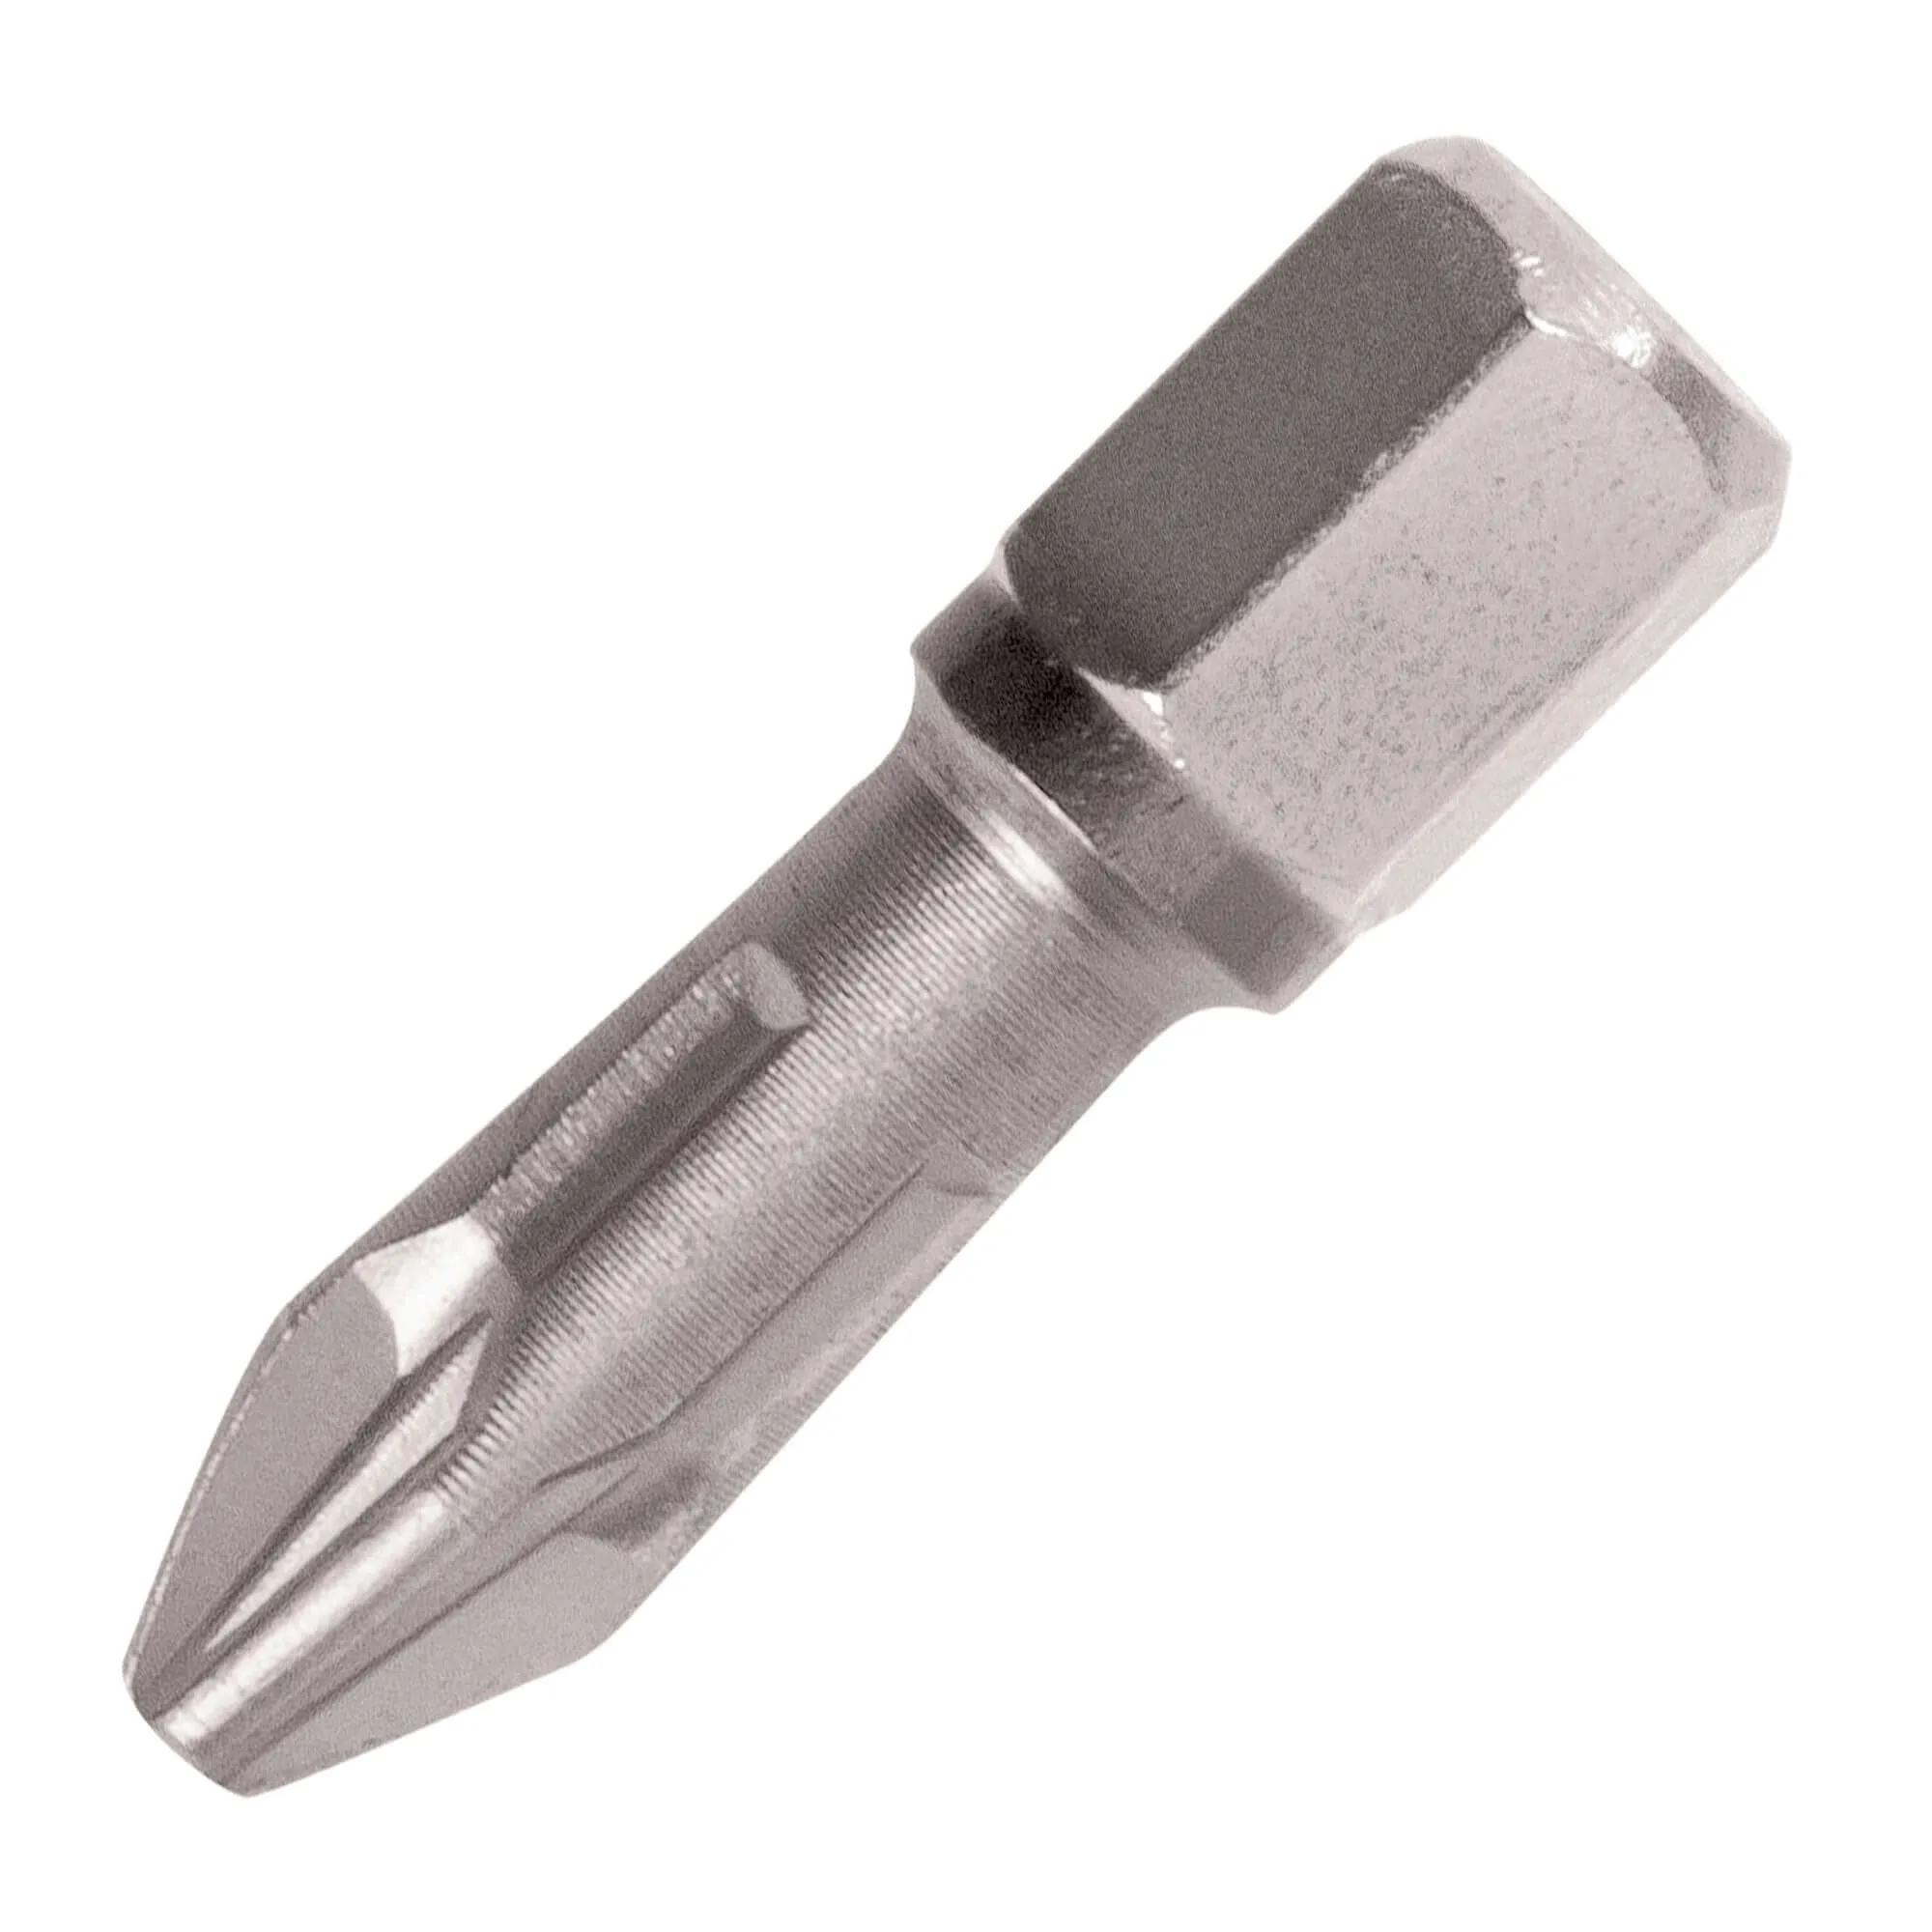 Trend Snappy Tin Coated Pozi Screwdriver Bits - PZ0, 25mm, Pack of 3